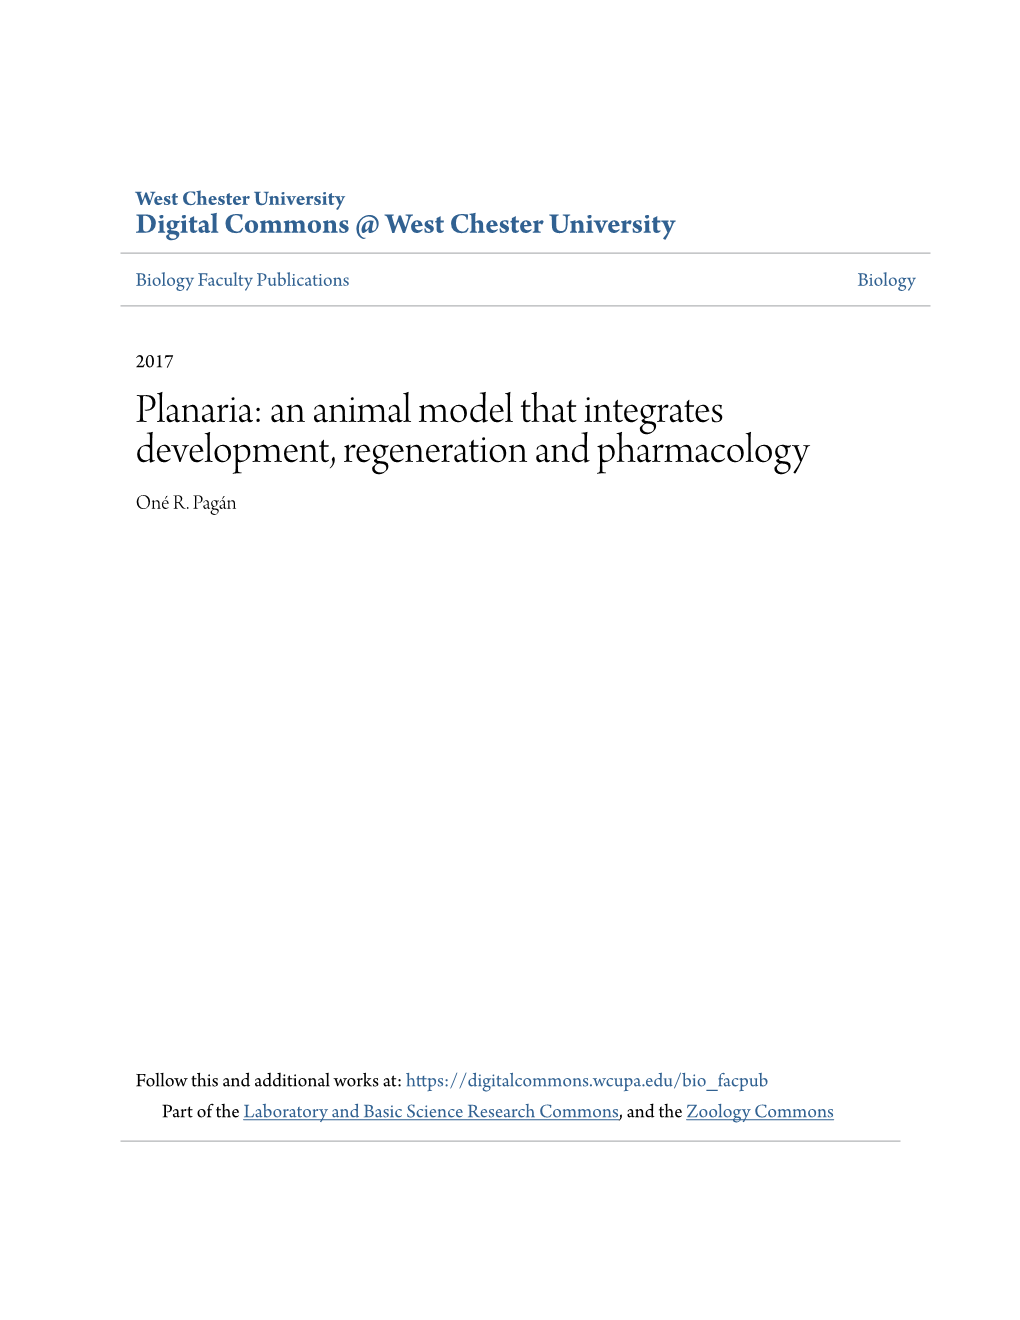 Planaria: an Animal Model That Integrates Development, Regeneration and Pharmacology Oné R